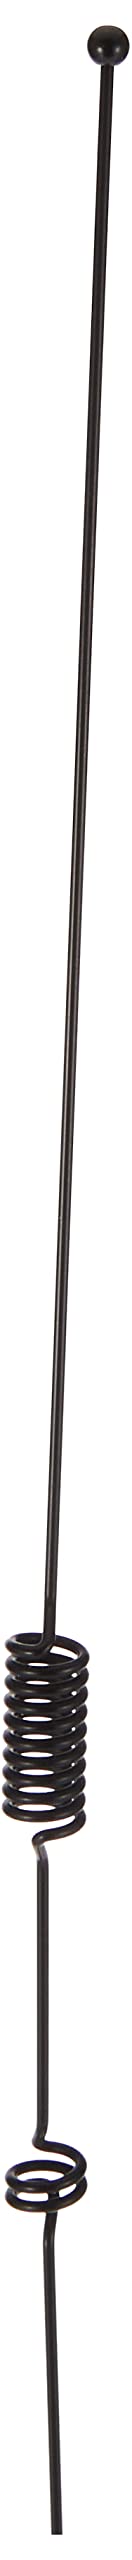 Tram 1089-BNC Scanner Mini-Magnet Antenna VHF/UHF/800MHz-1, 300MHz with BNC-Male Connector, 16.15in. x 2.90in. x 1.30in.